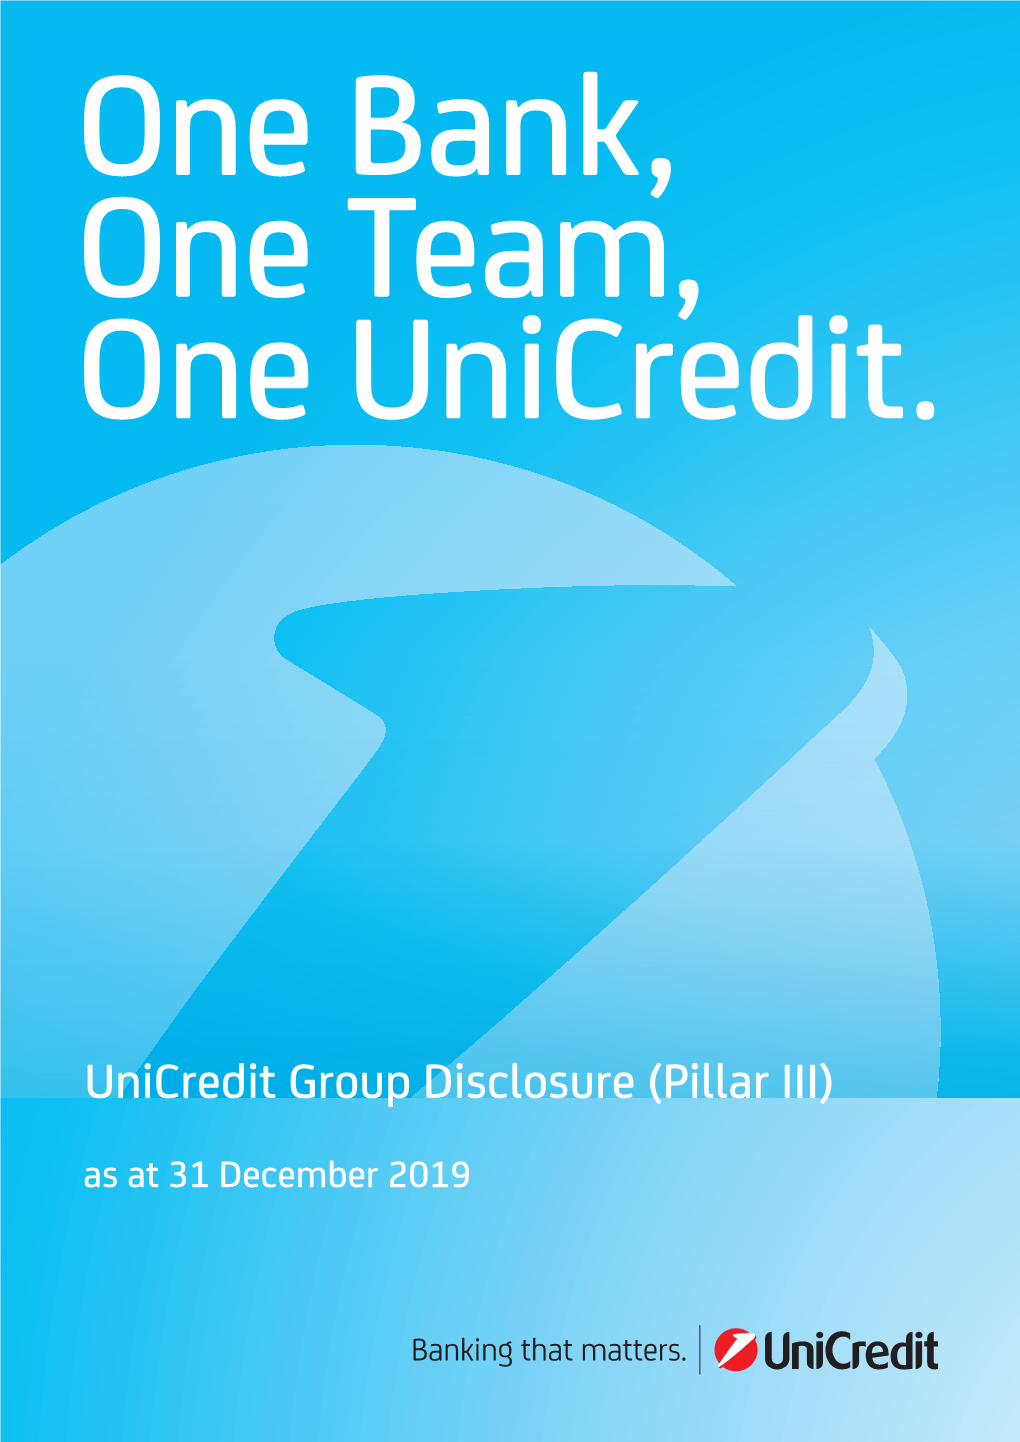 Unicredit Group Disclosure (Pillar III) As at 31 December 2019 I Content